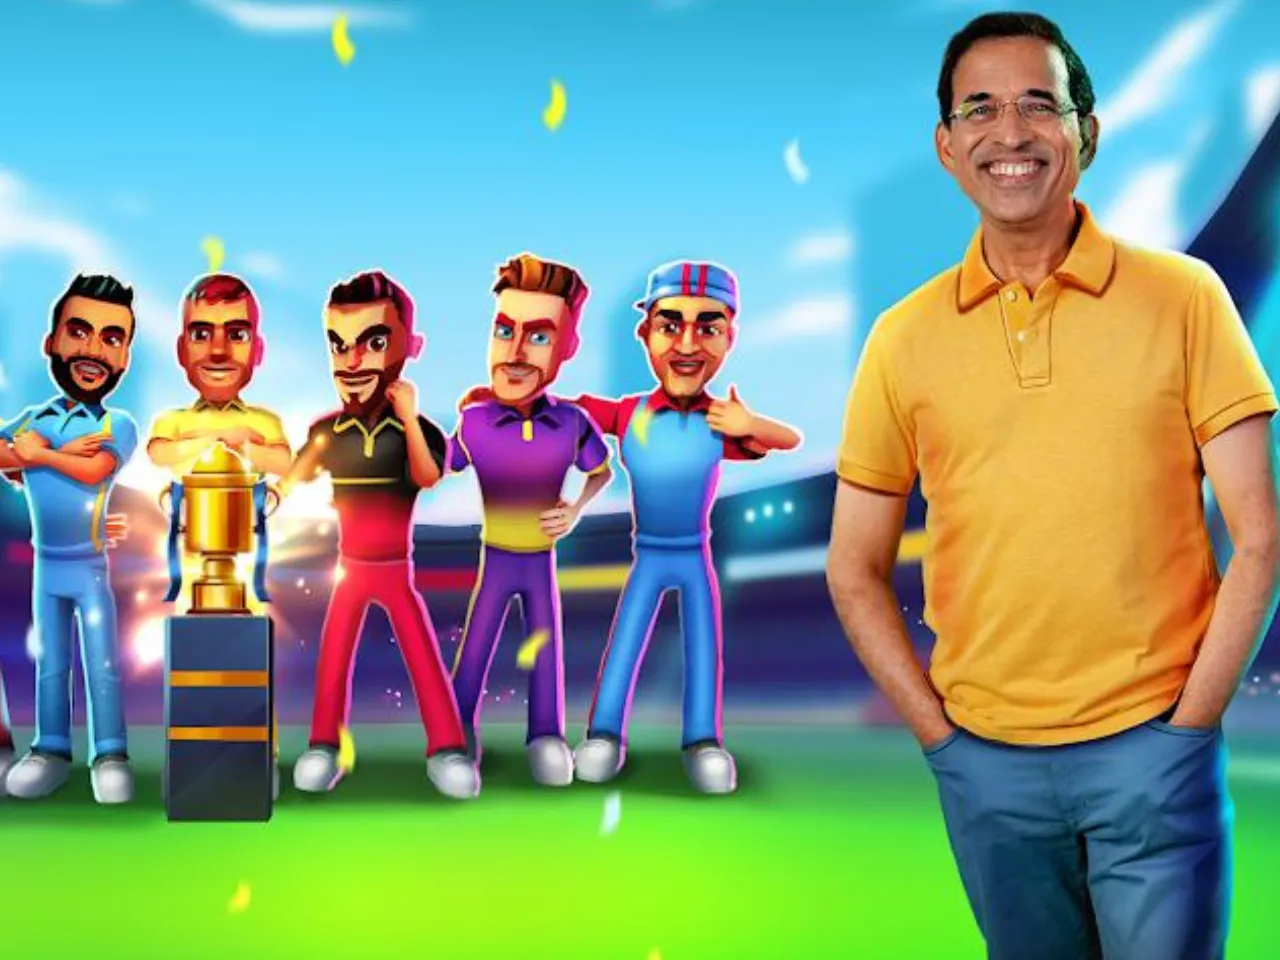 Hitwicket onboards commentator Harsha Bhogle